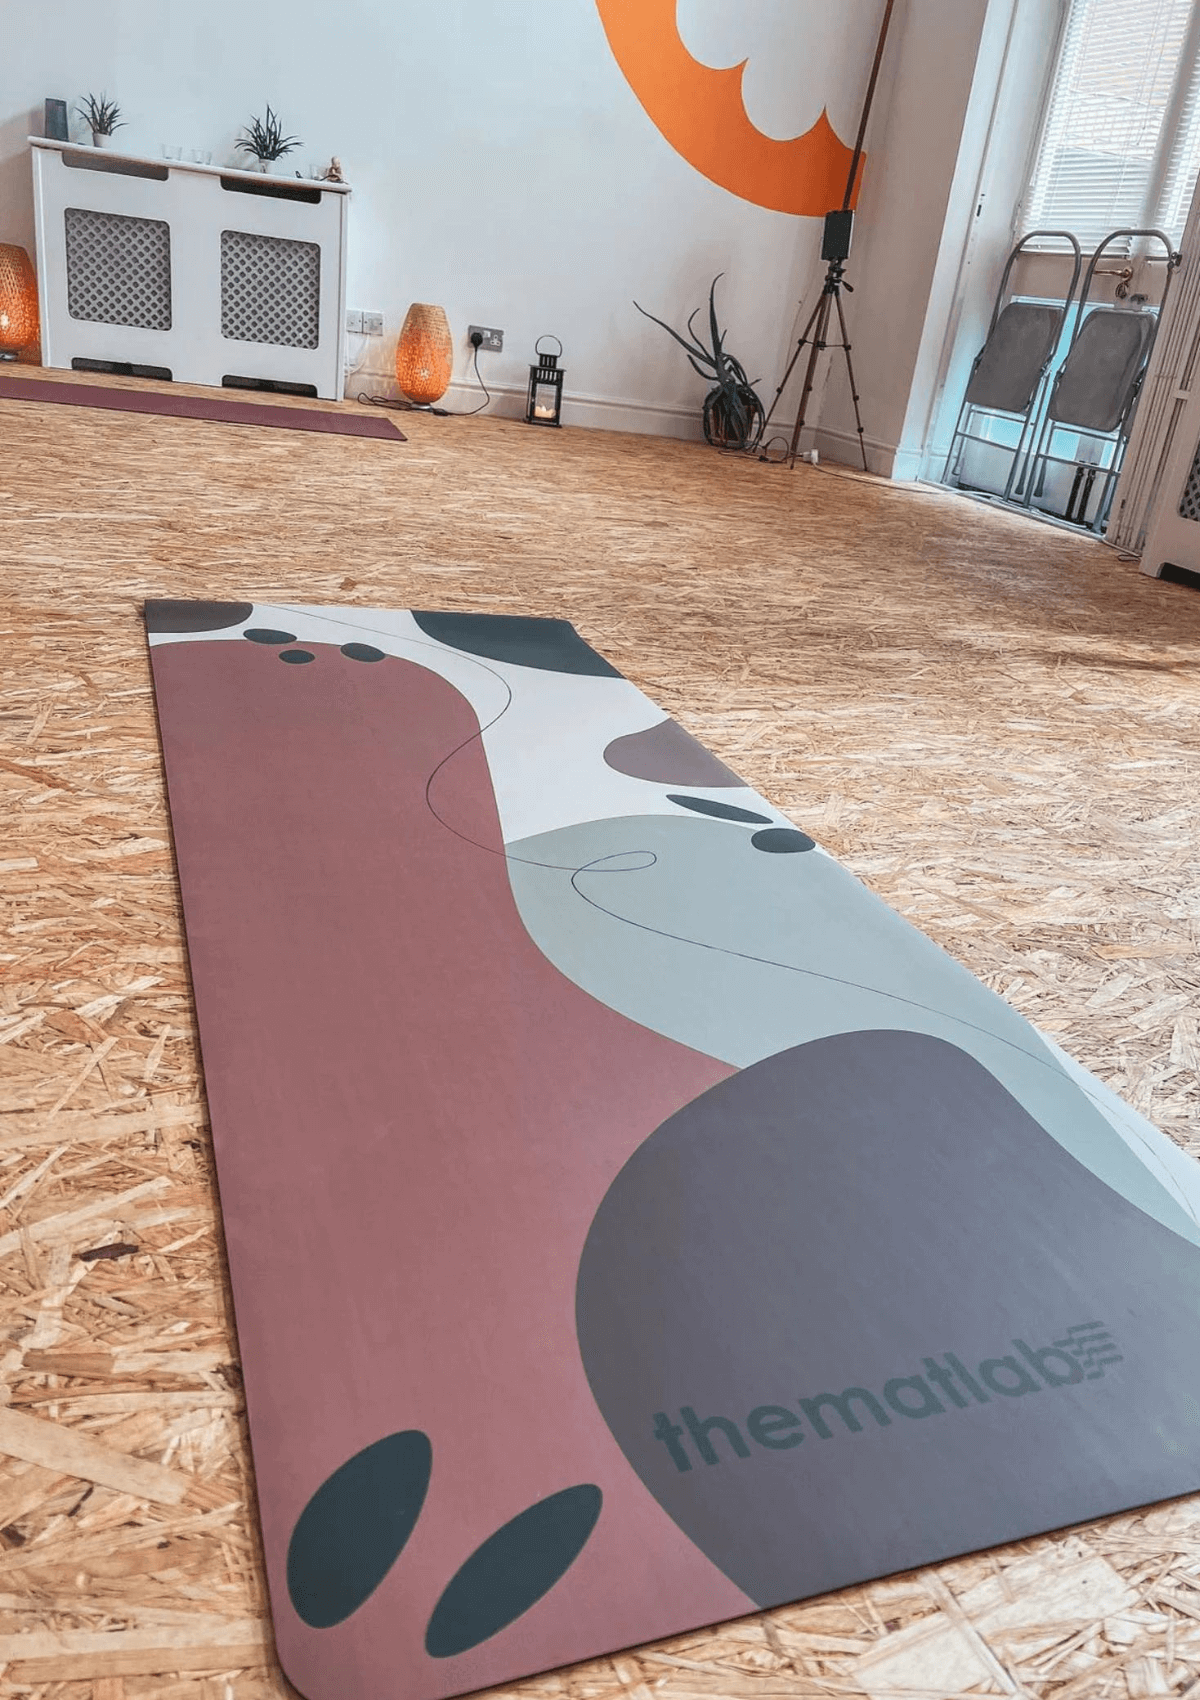 pack yoga mats for a yoga festival, or buy one there